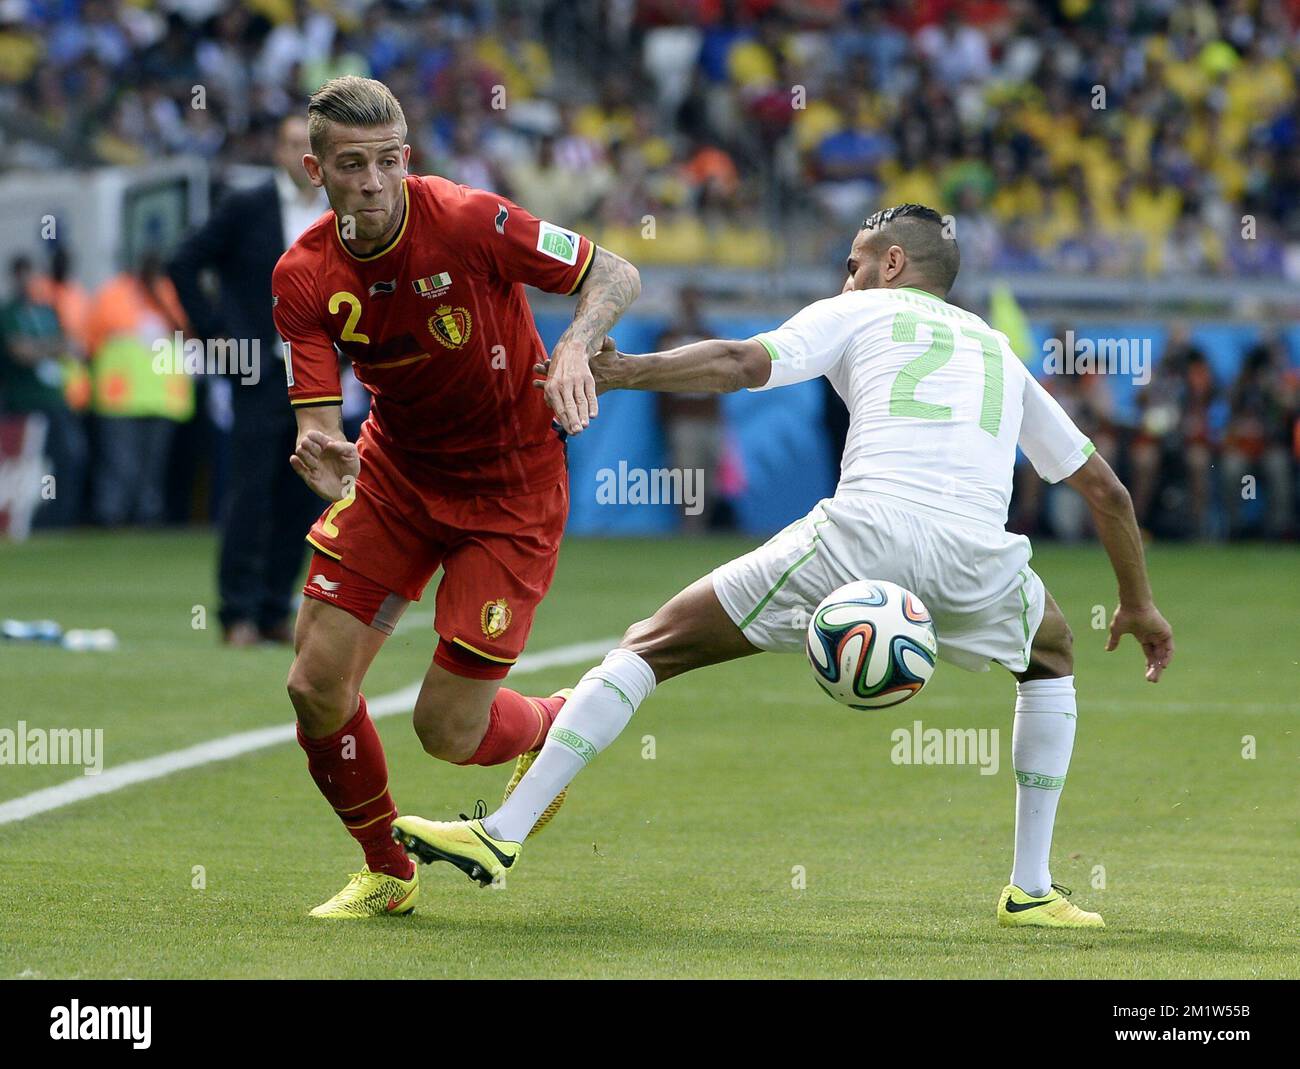 Belgium's Toby Alderweireld and Algeria's Riyad Mahrez pictured in action during a soccer game between Belgian national team The Red Devils and Algeria in Belo Horizonte, Brazil, the first game in Group H of the first round of the 2014 FIFA World Cup, Tuesday 17 June 2014.  Stock Photo